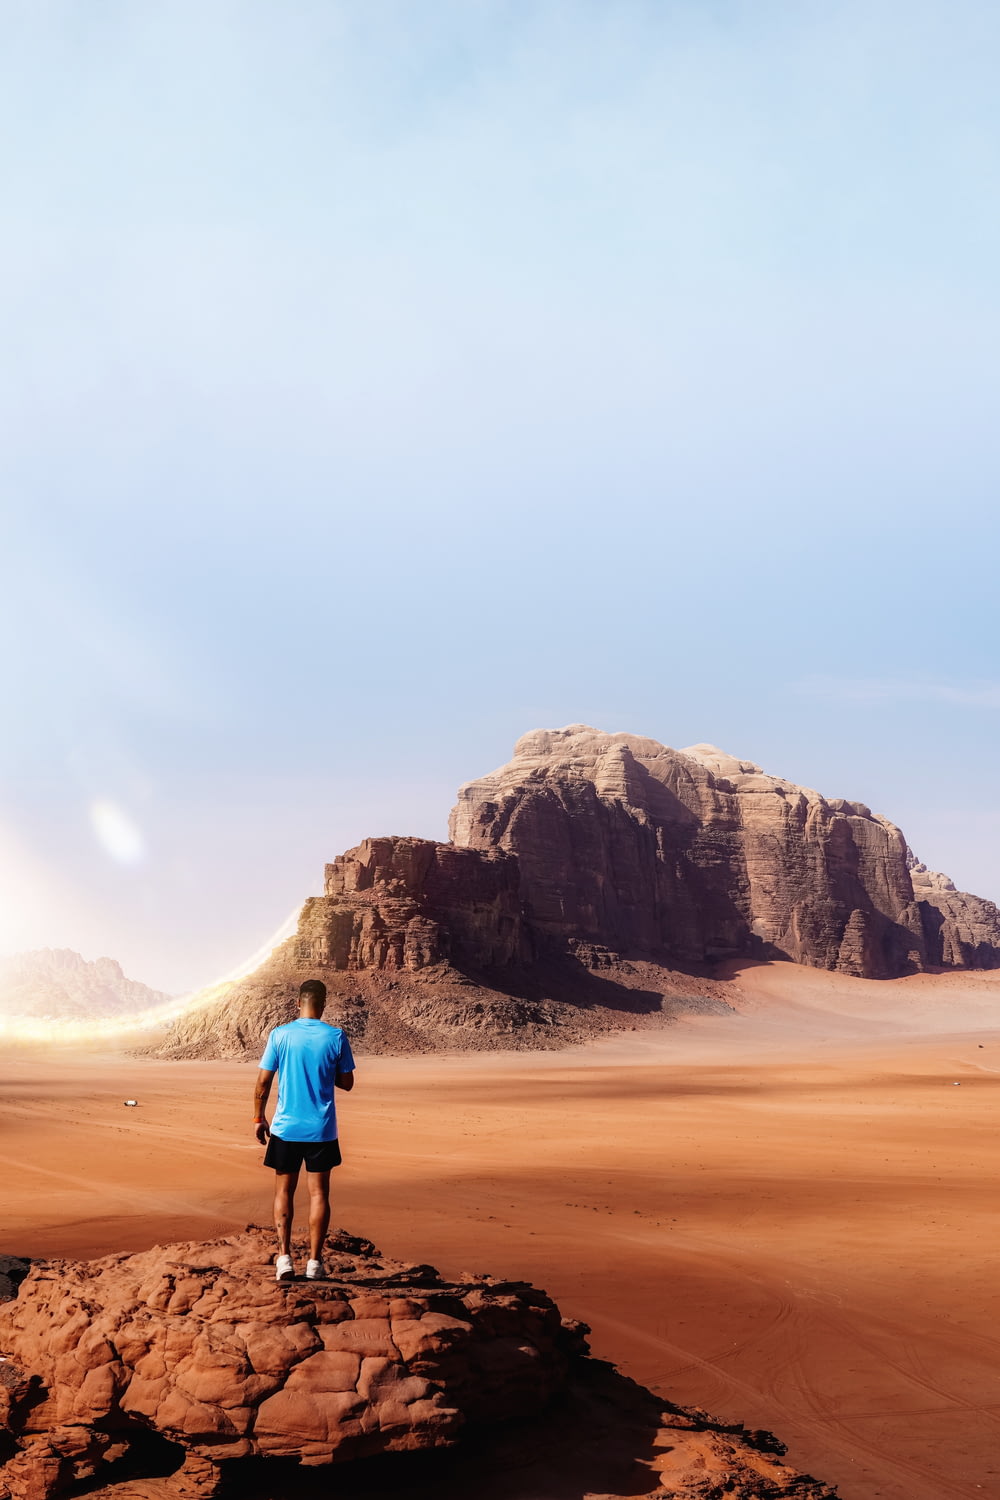 a man standing on a rock in the middle of a desert